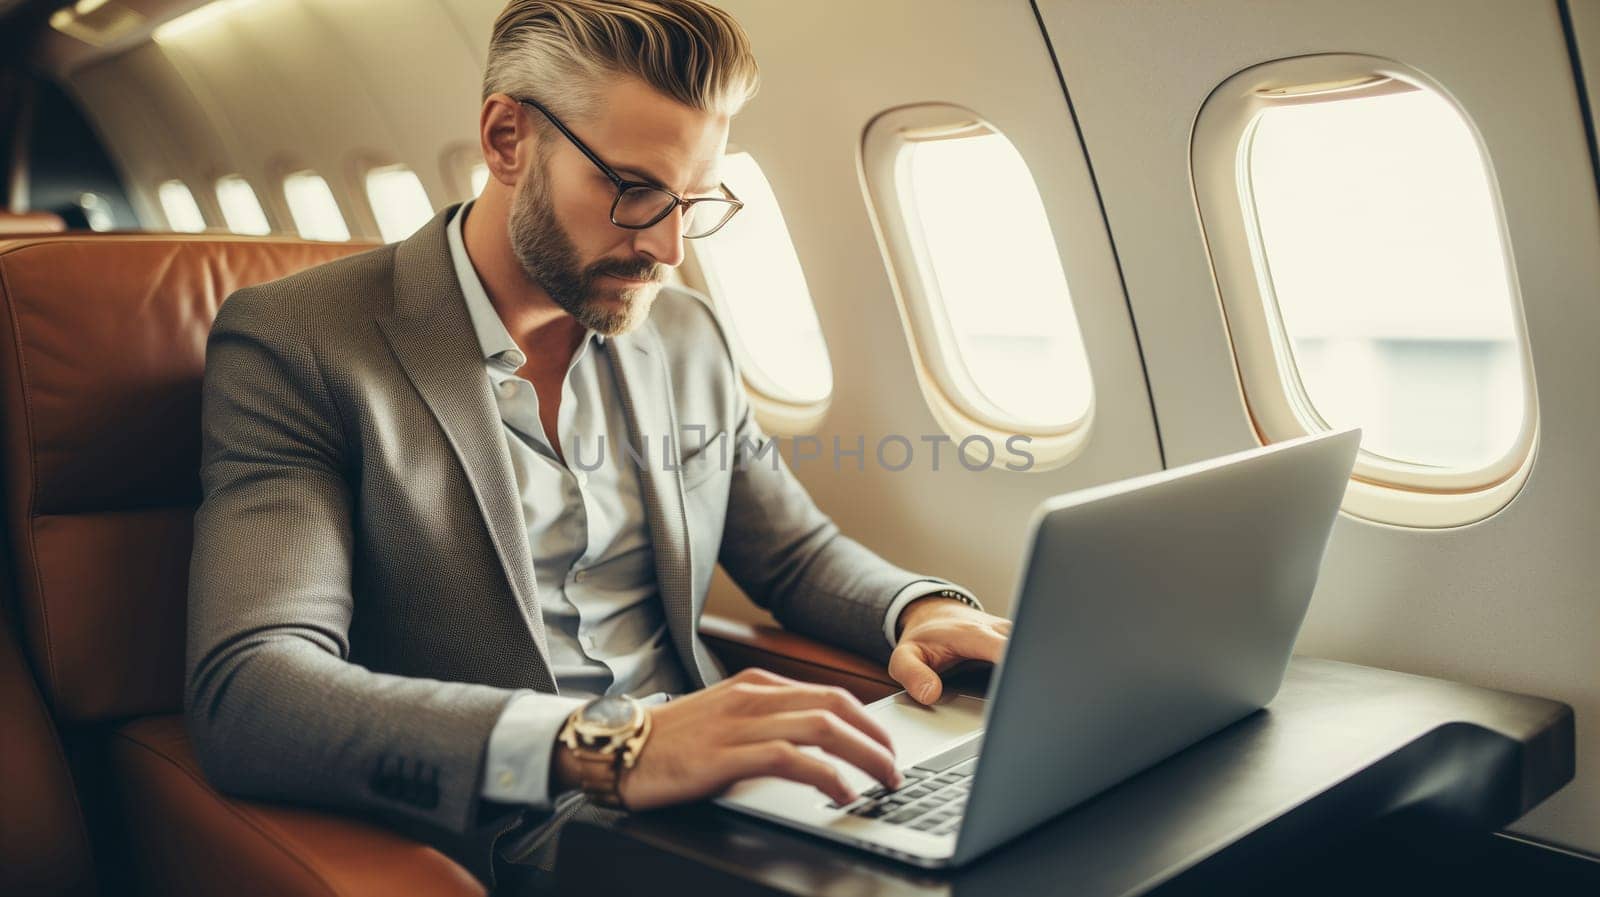 Confident mature businessman passenger, man working with laptop on an airplane while sits in a seat business class cabin